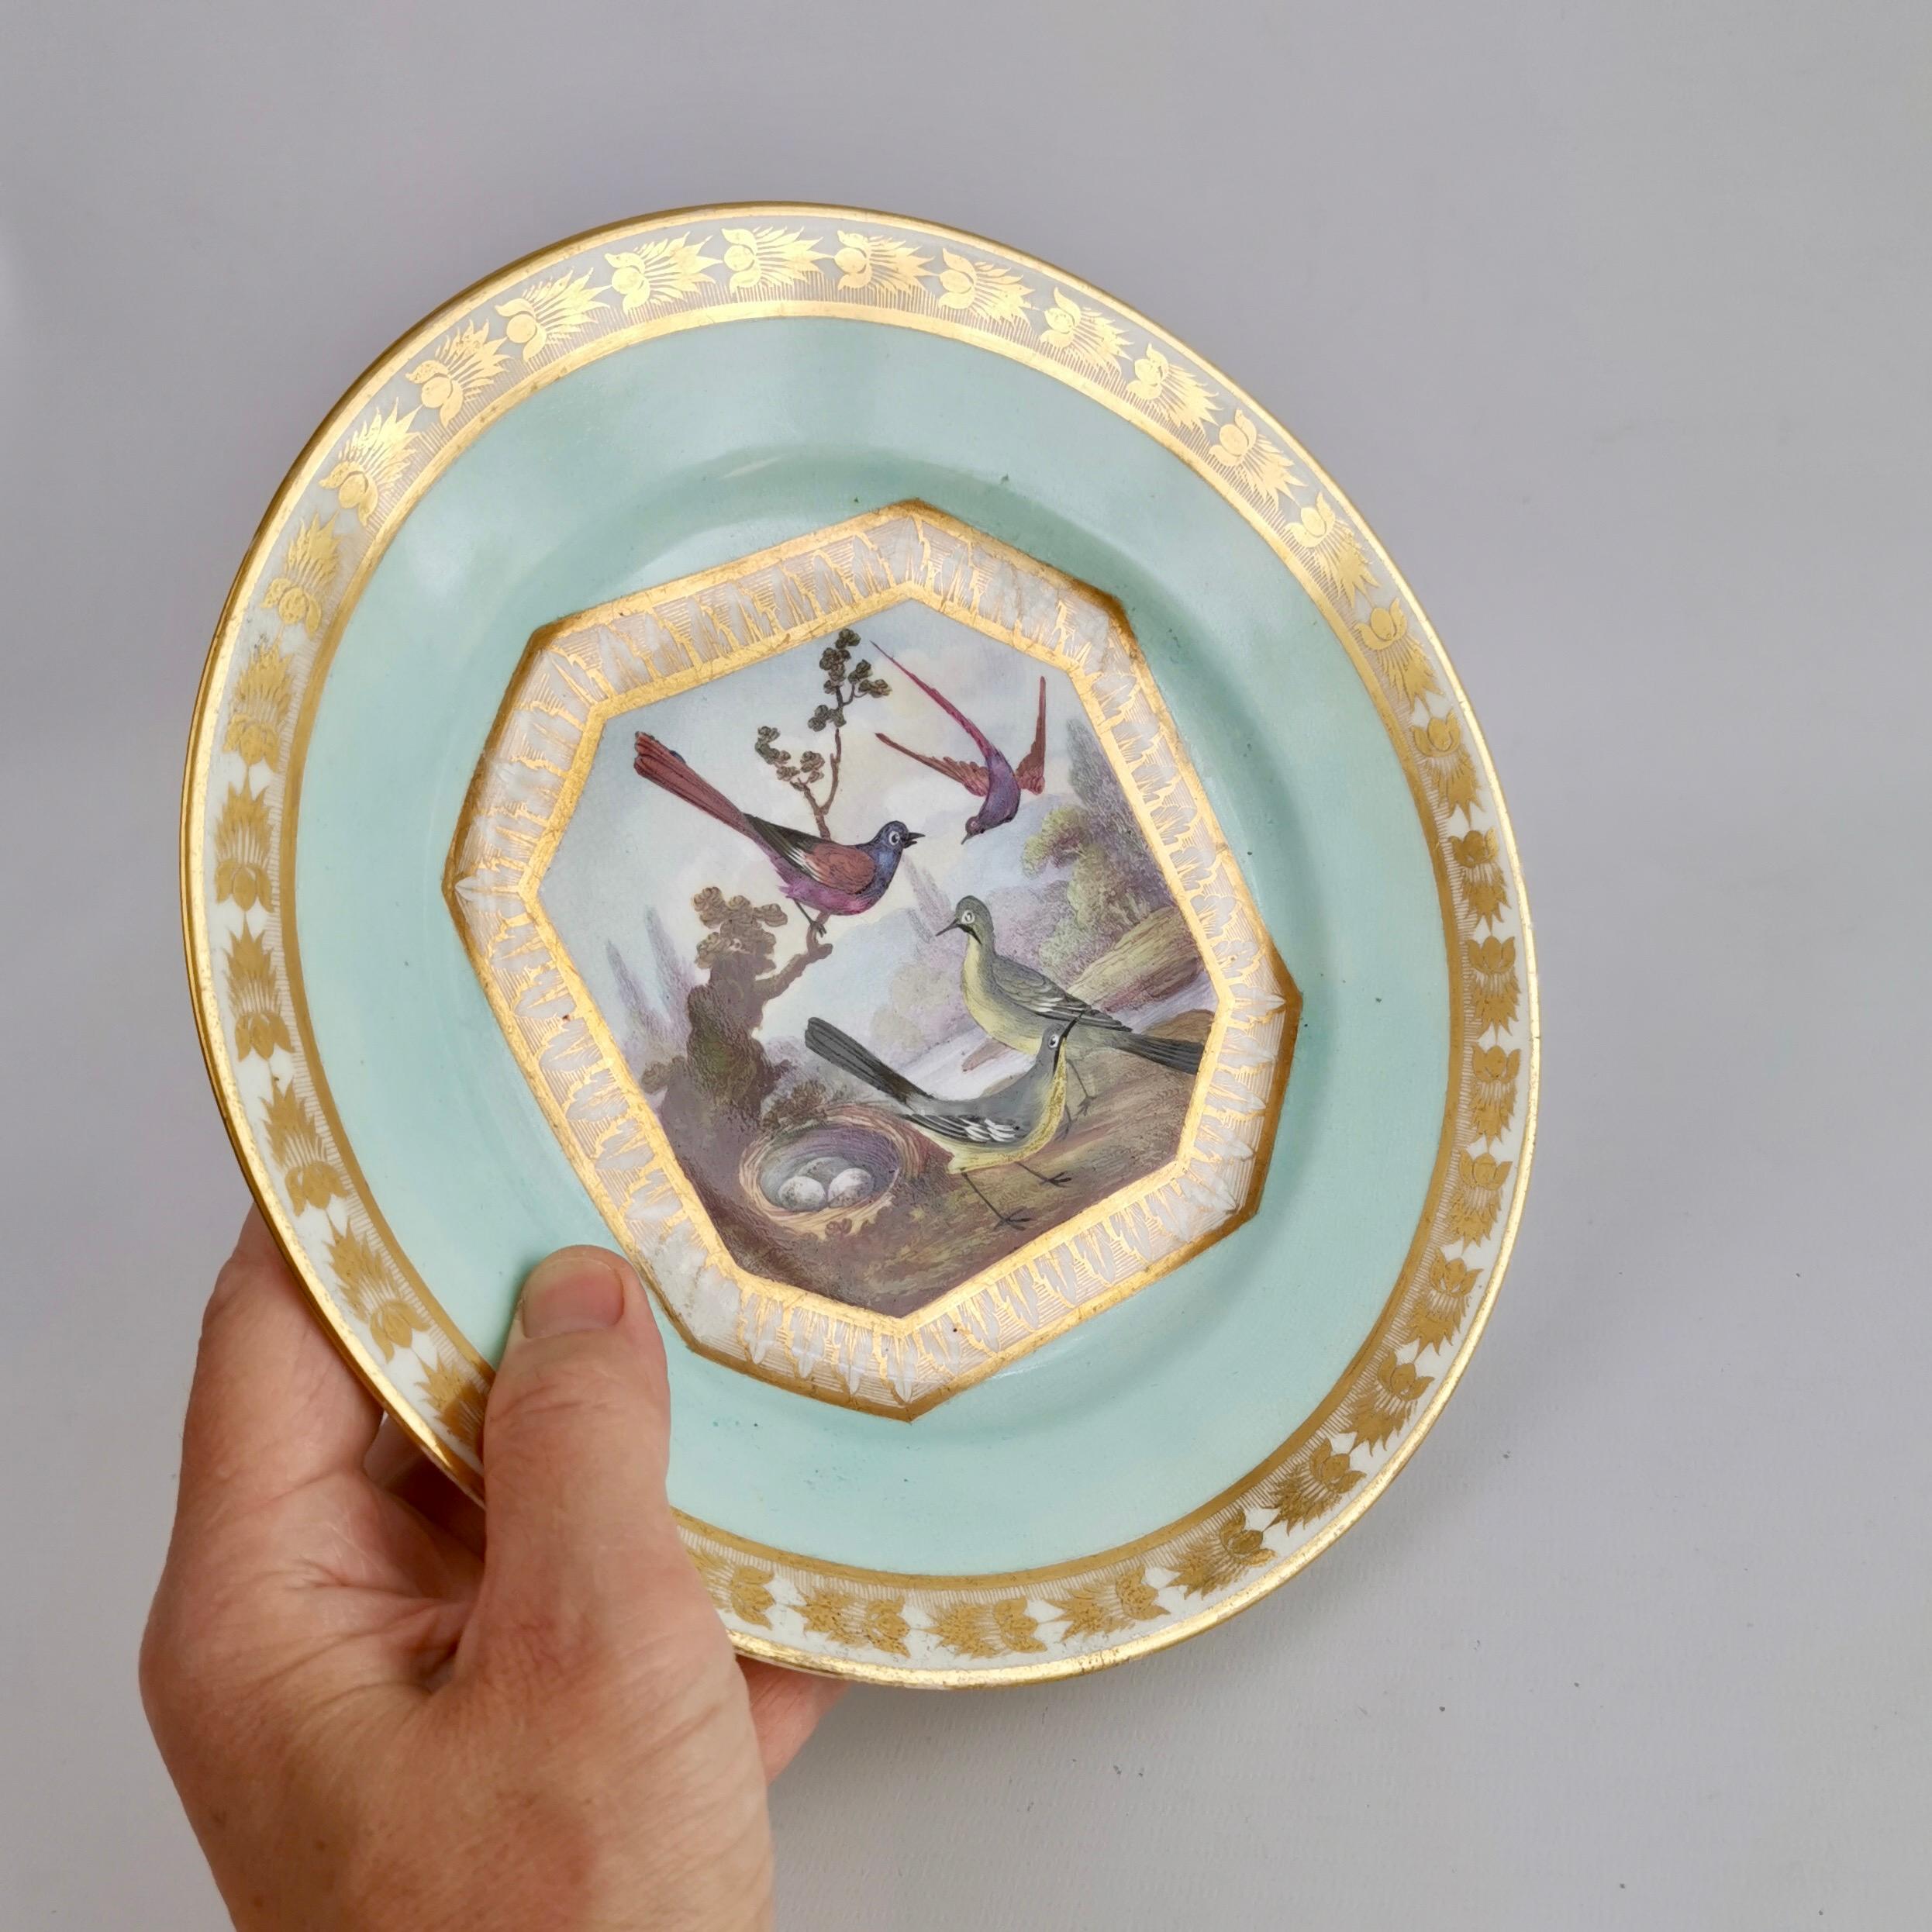 This is a stunning dessert plate made by Derby between 1815 and 1820, which was the Regency era. The plate has a pale turquoise ground, beautiful gilt borders and a stunning painting of fantastical exotic birds in a landscape painted by Richard